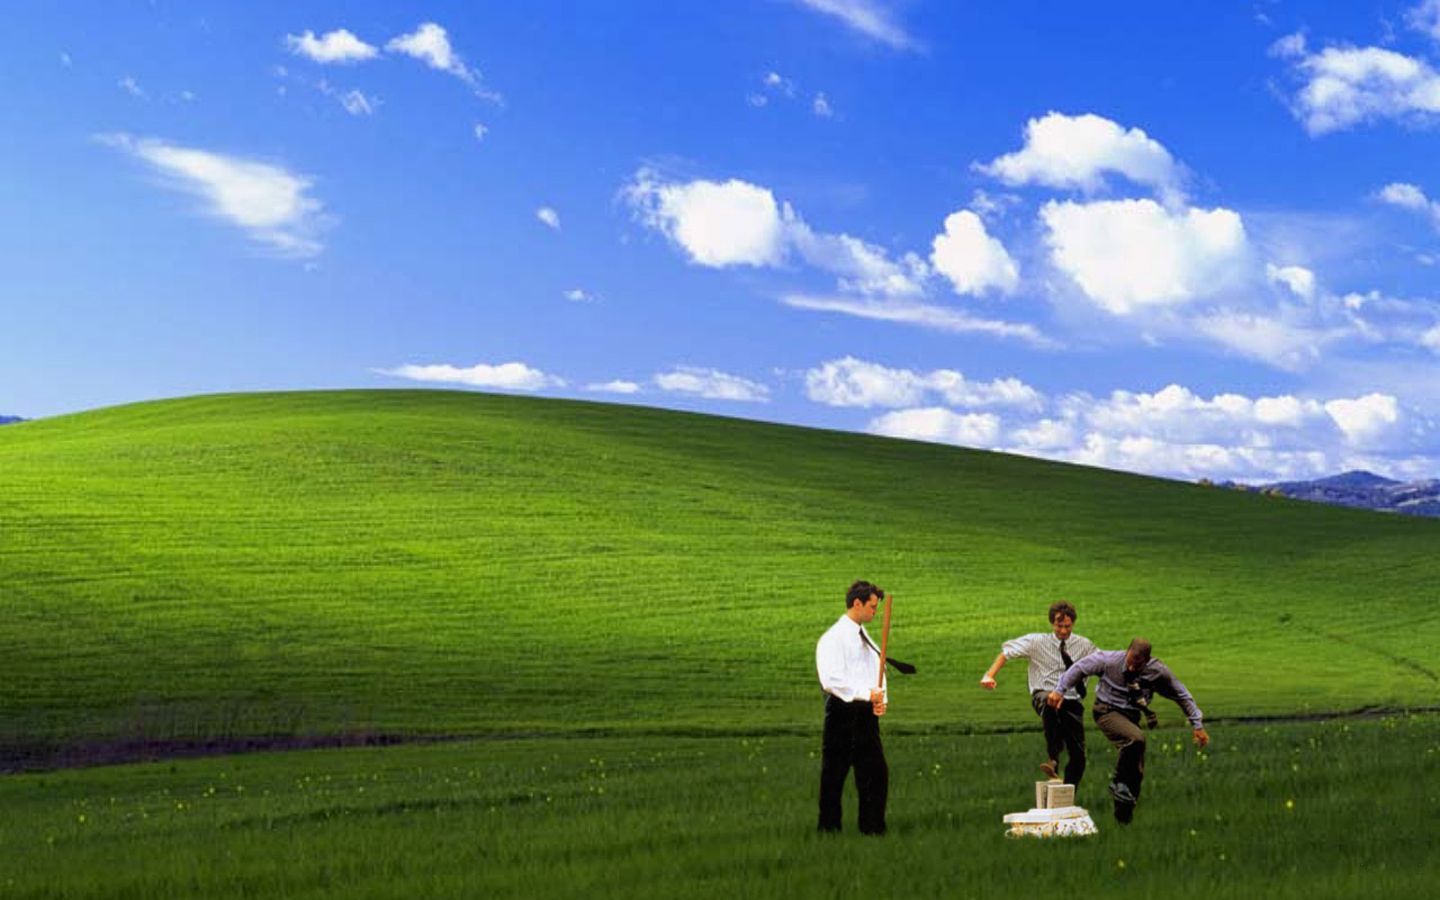 Office space wallpaper - - High Quality and Resolution